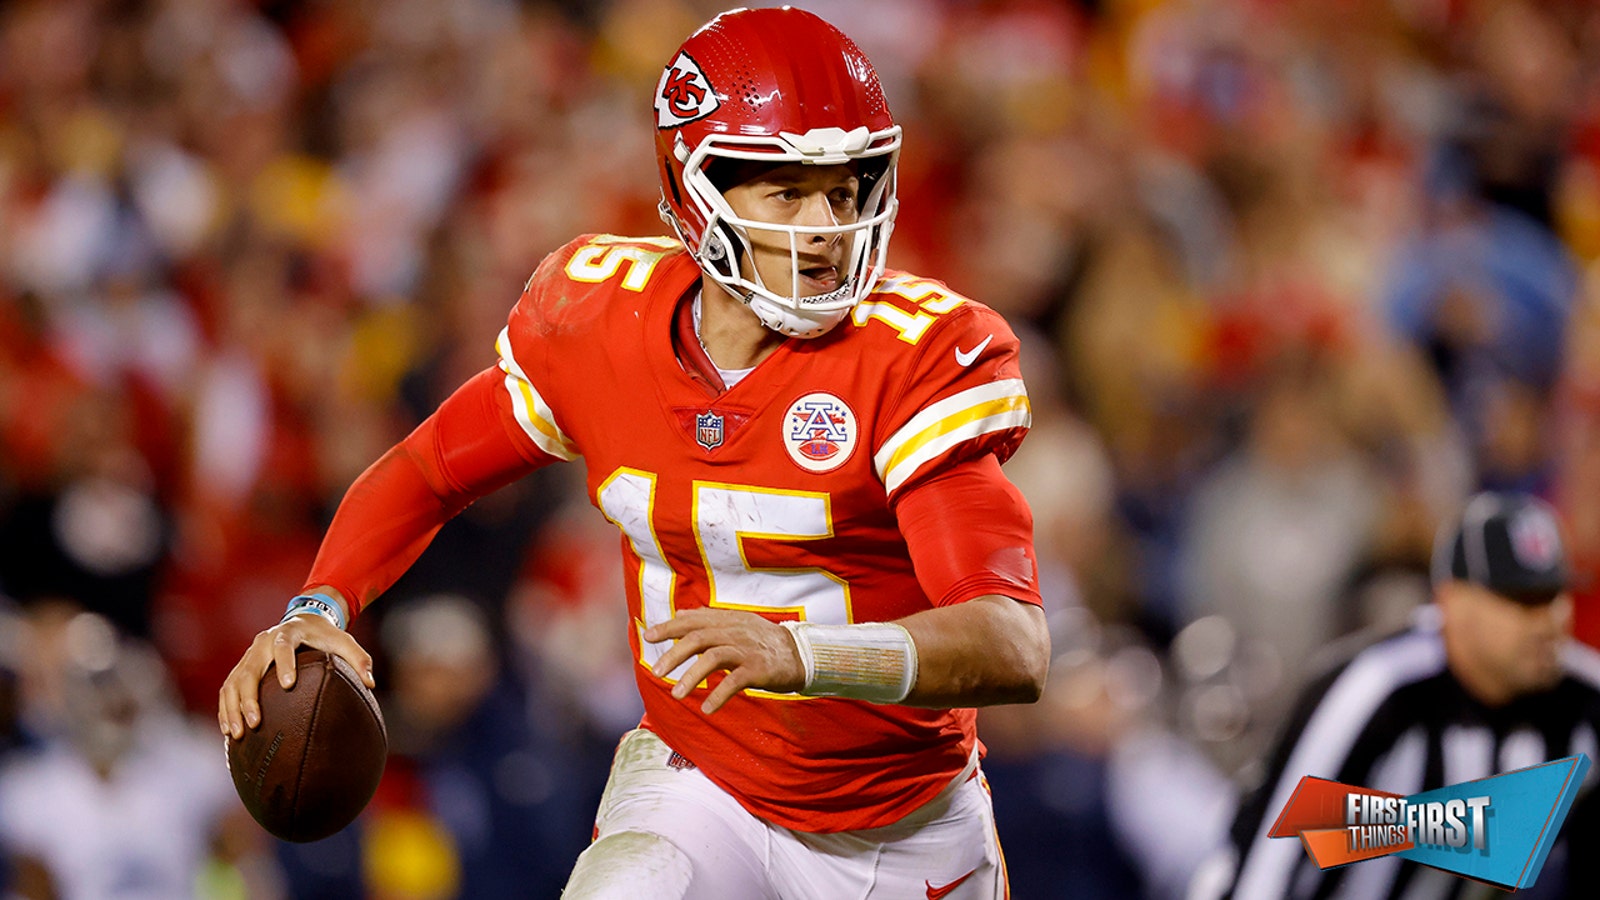 Patrick Mahomes, Bosses Defeat Titans VOT, #1 in West Asia |  The most important things first